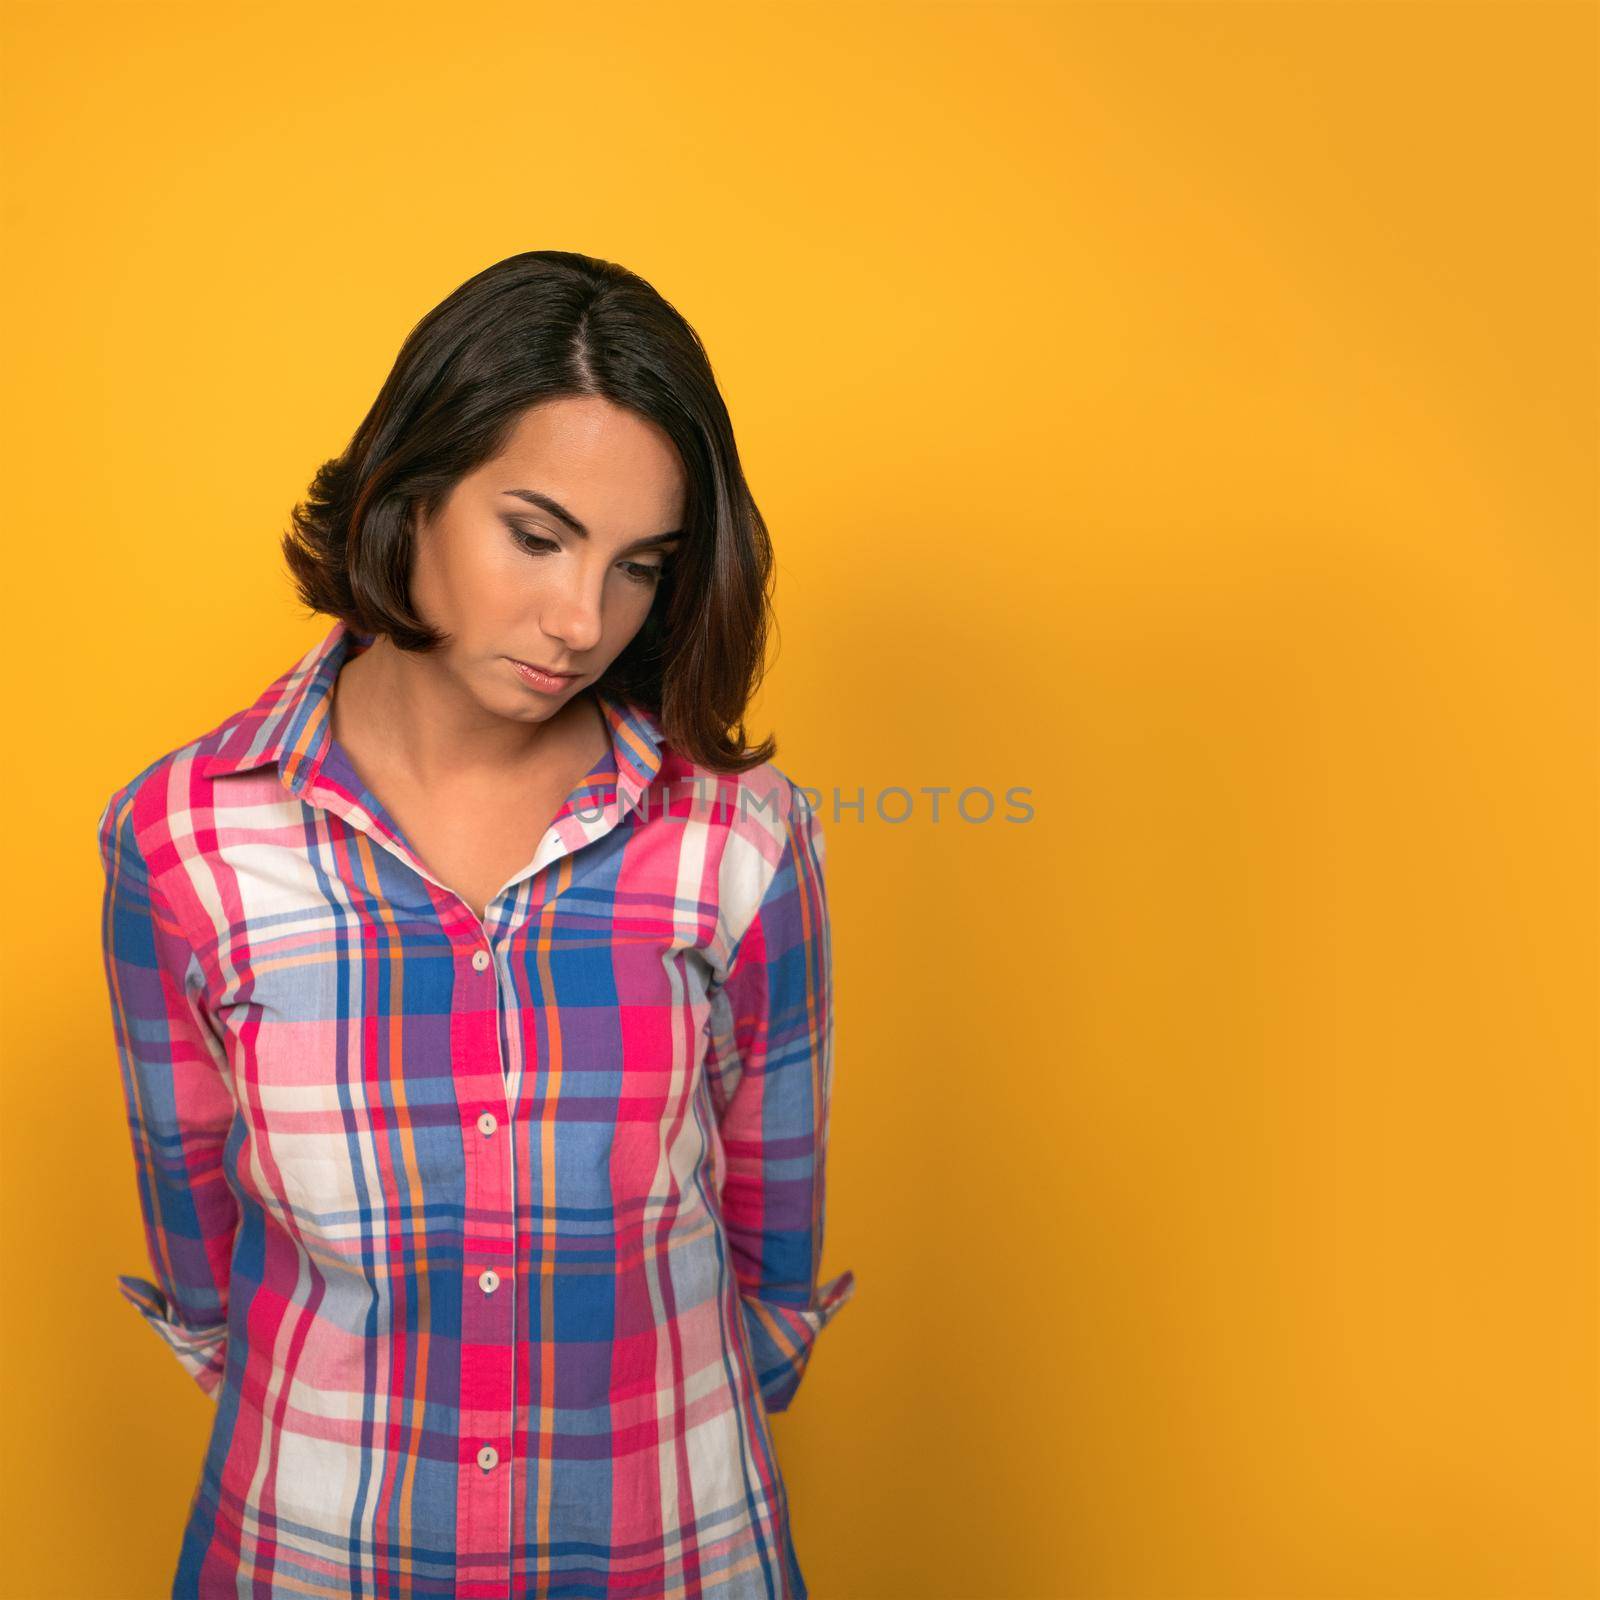 Young Sad pensive woman feels guilty, thinks looking down while standing against of yellow wall in background with copy space on right side by LipikStockMedia